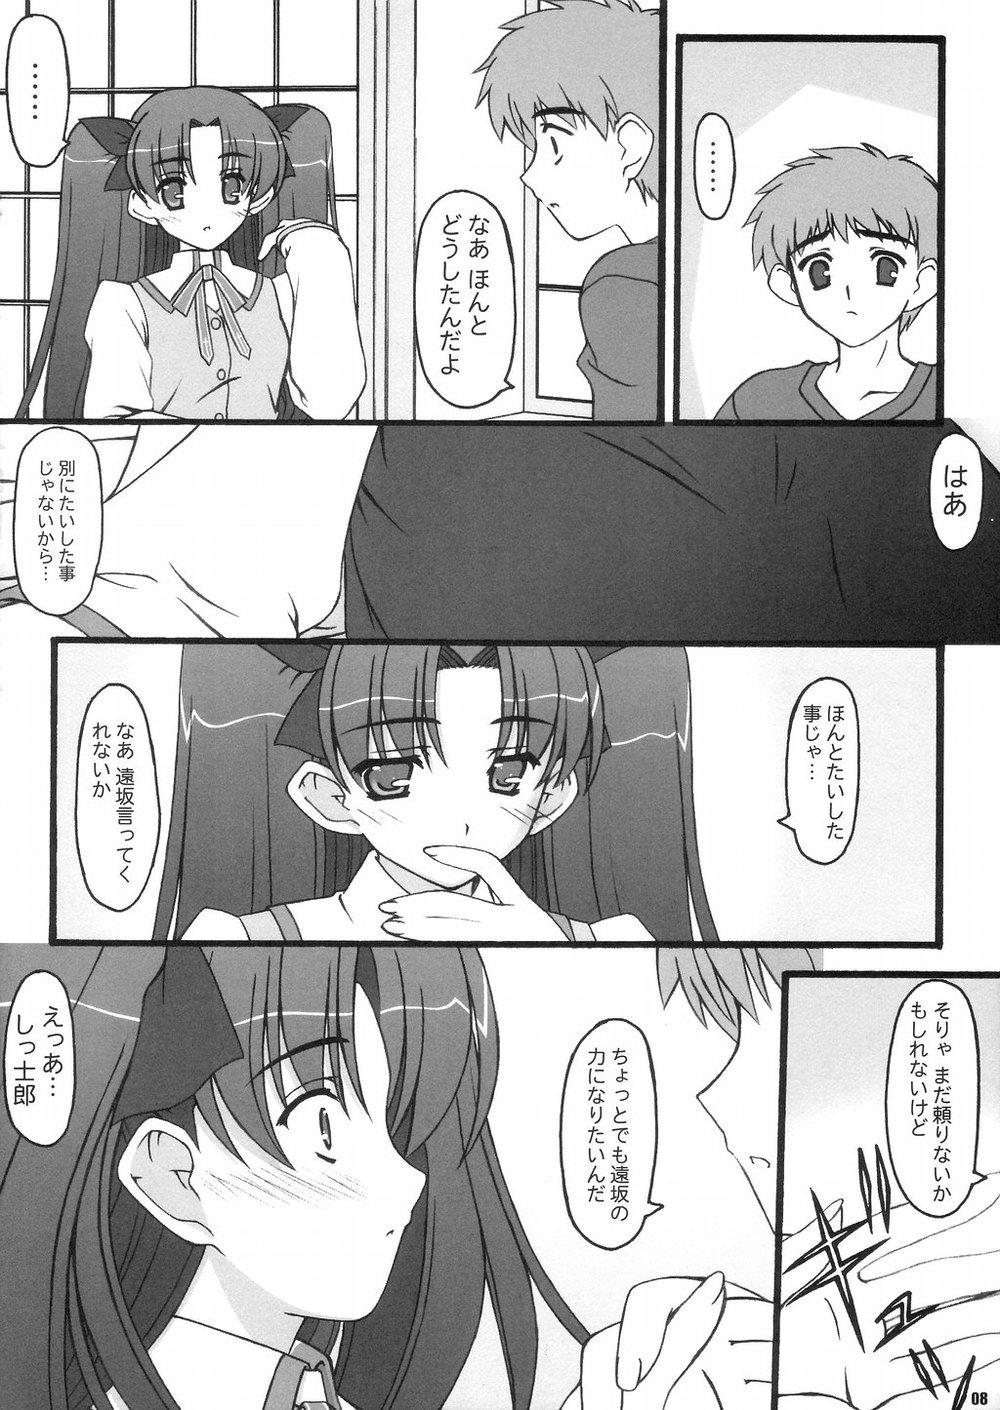 Casal Fight - Fate stay night Cutie - Page 7